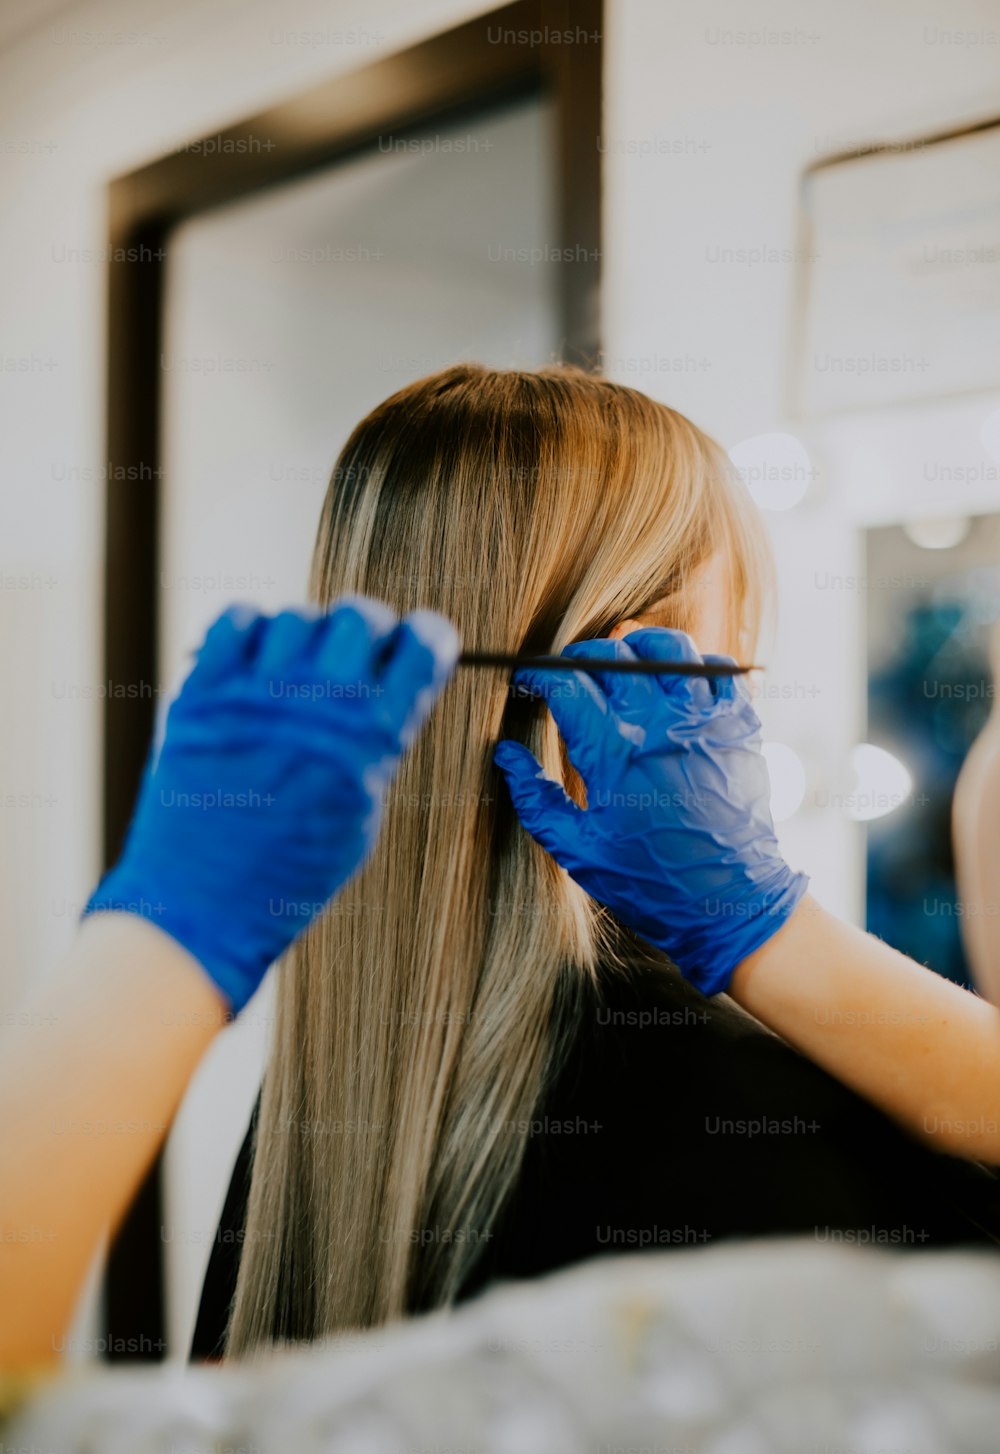 a person with blue gloves